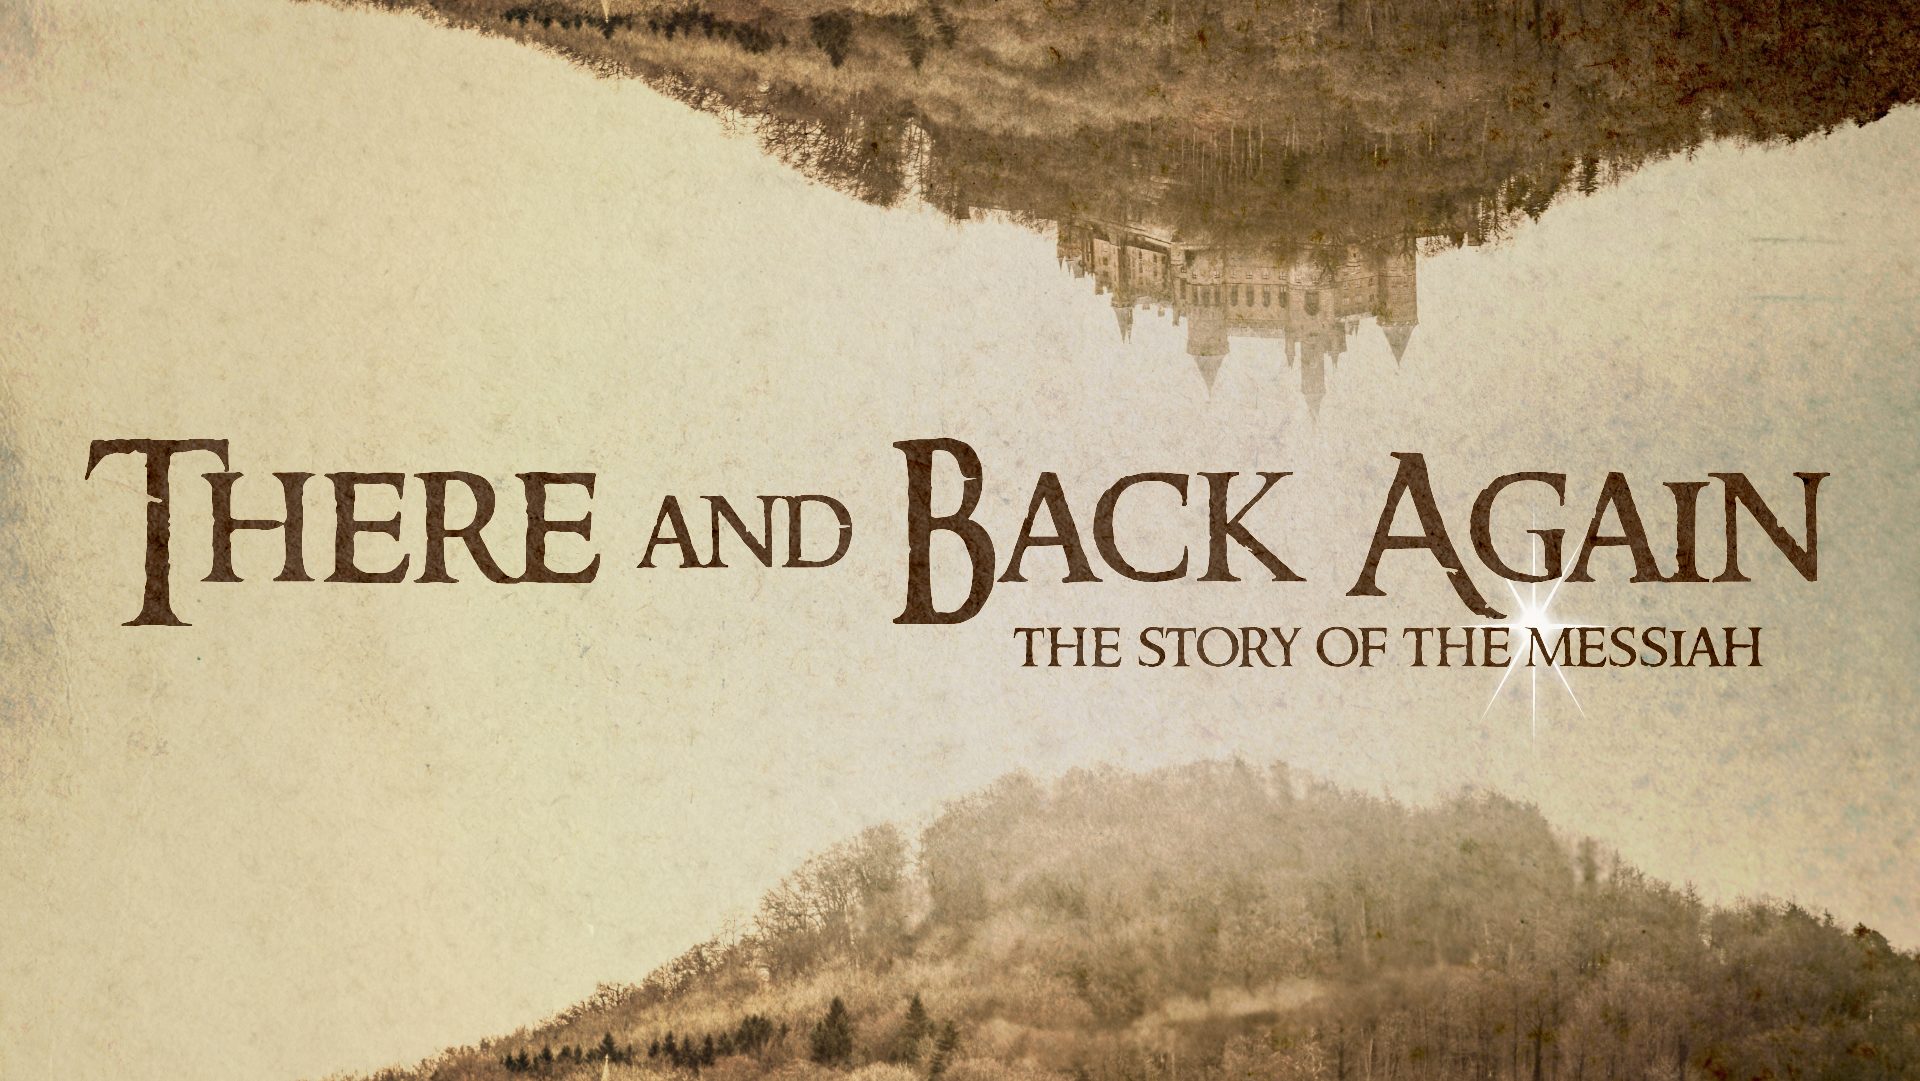 Featured image for “There and Back Again: The Story of the Messiah”